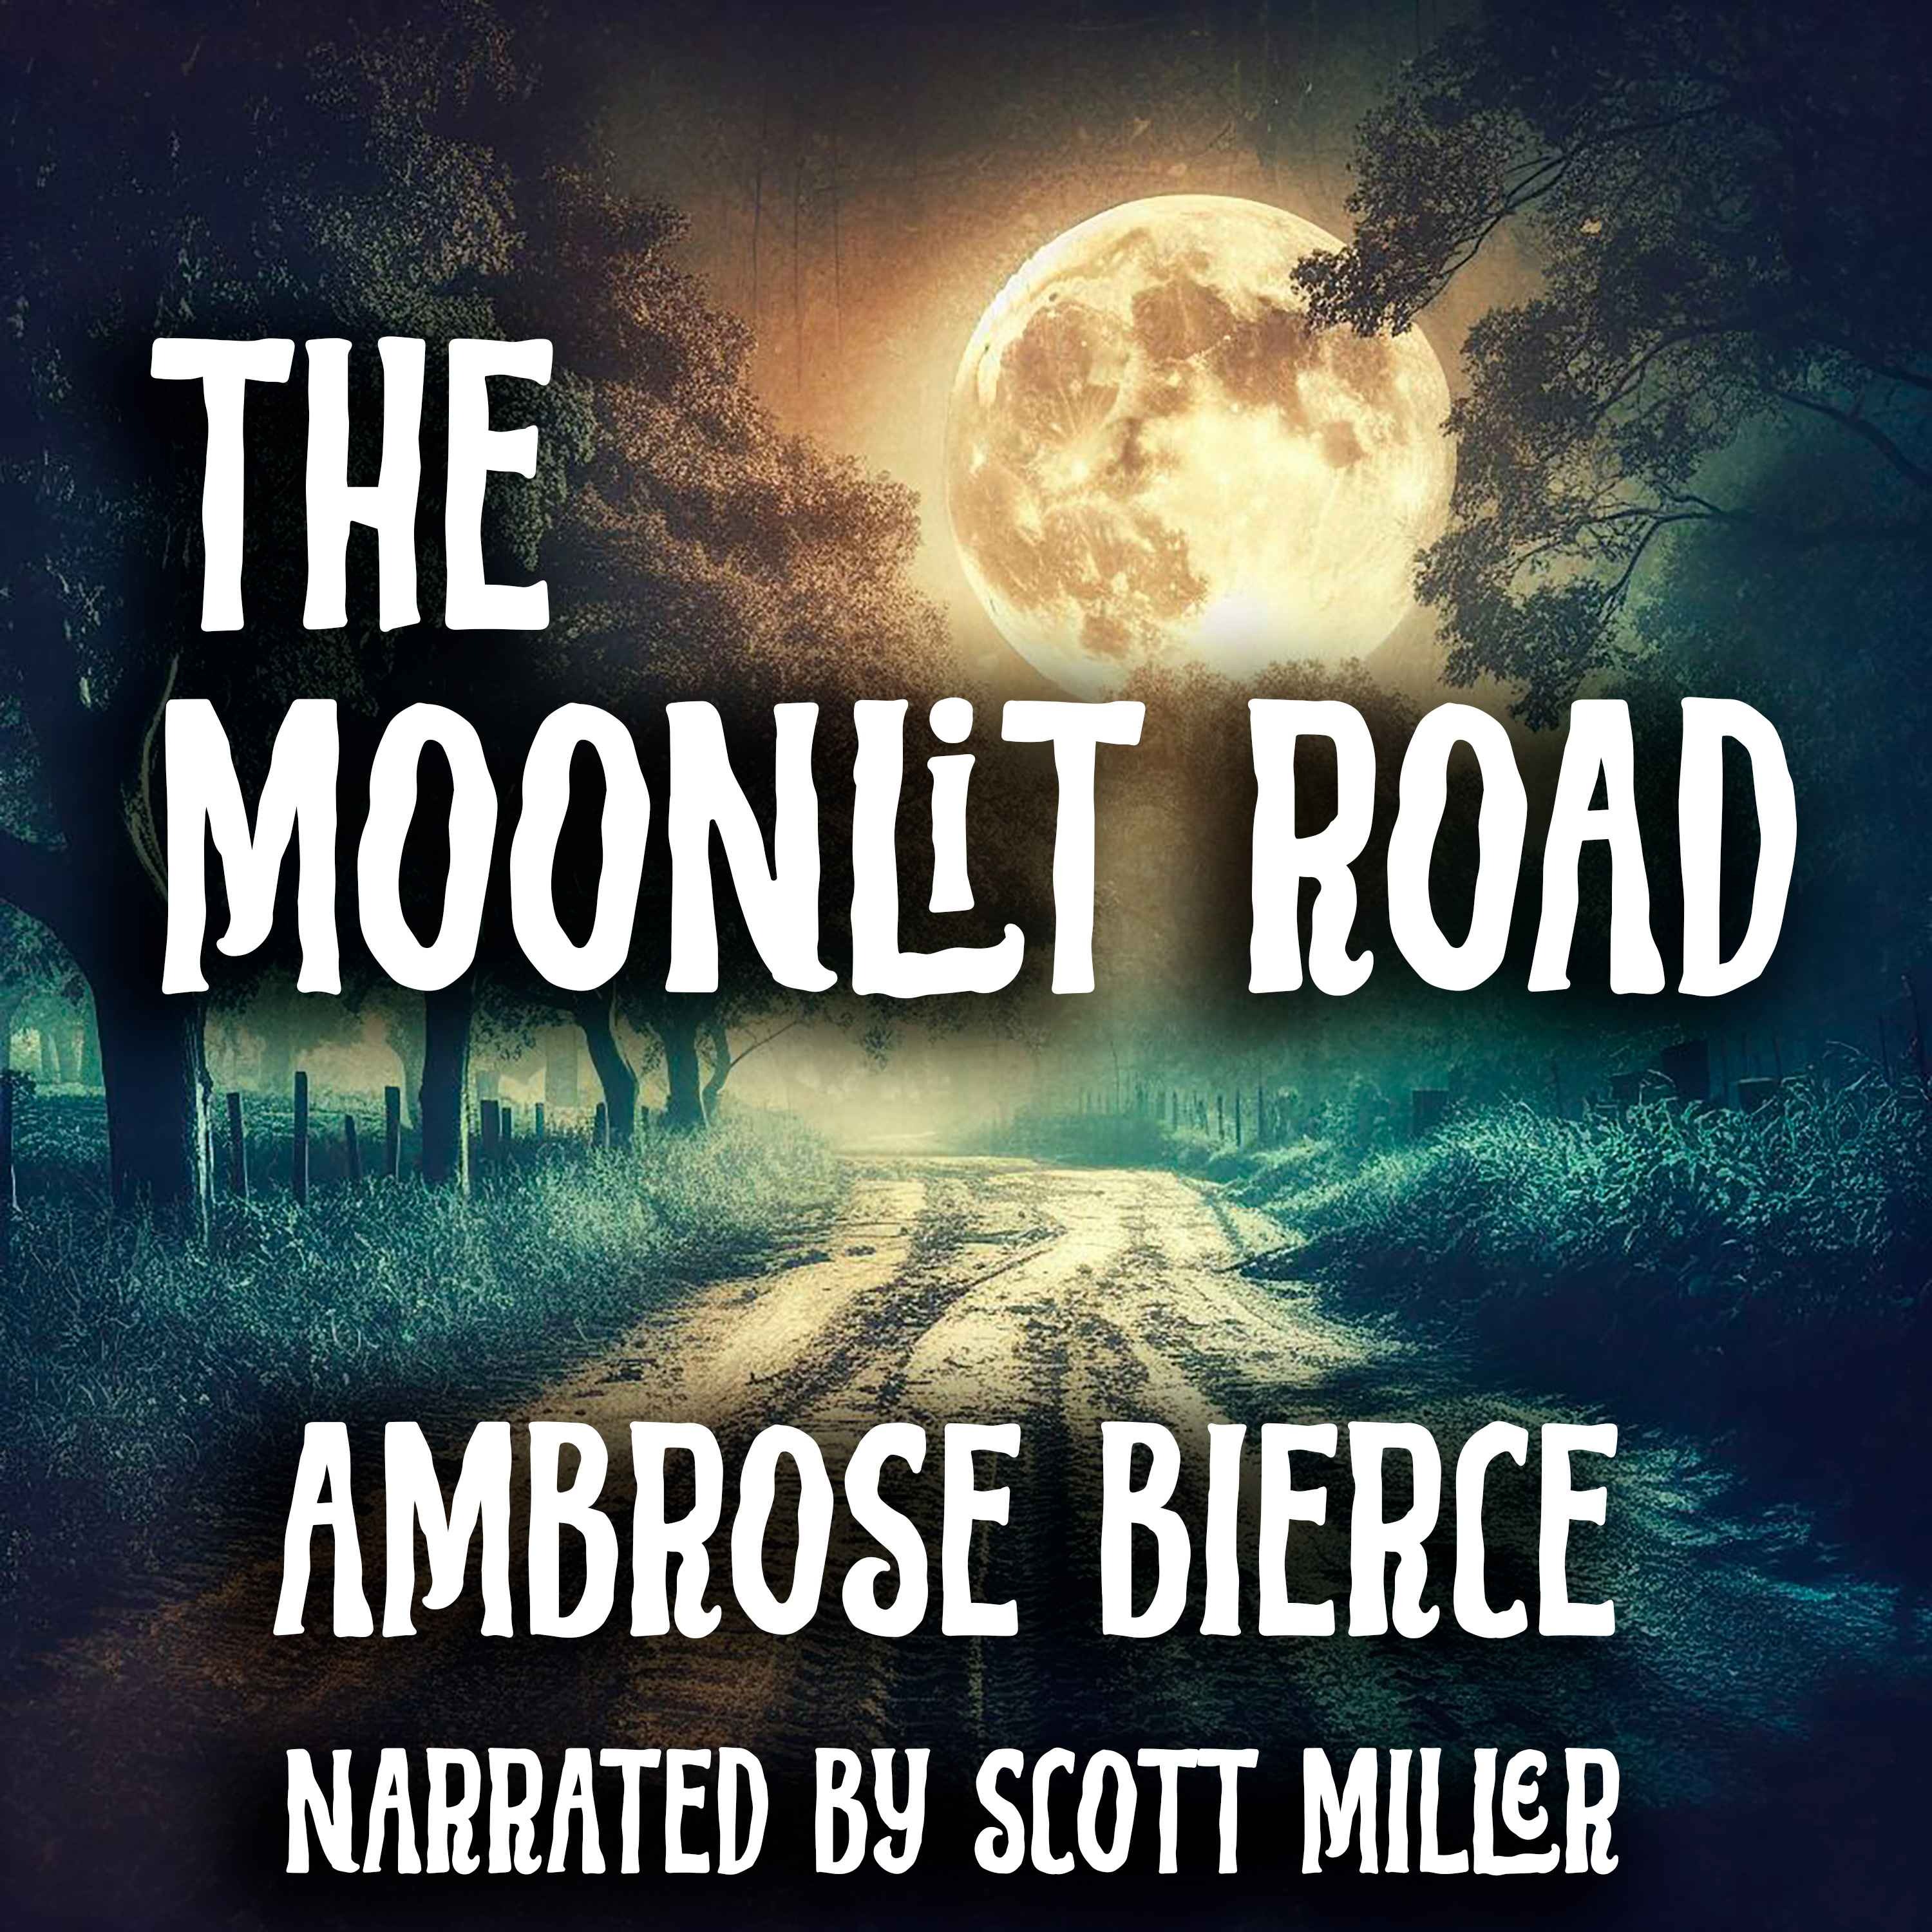 The Moonlit Road by Ambrose Bierce - Gothic Horror Story